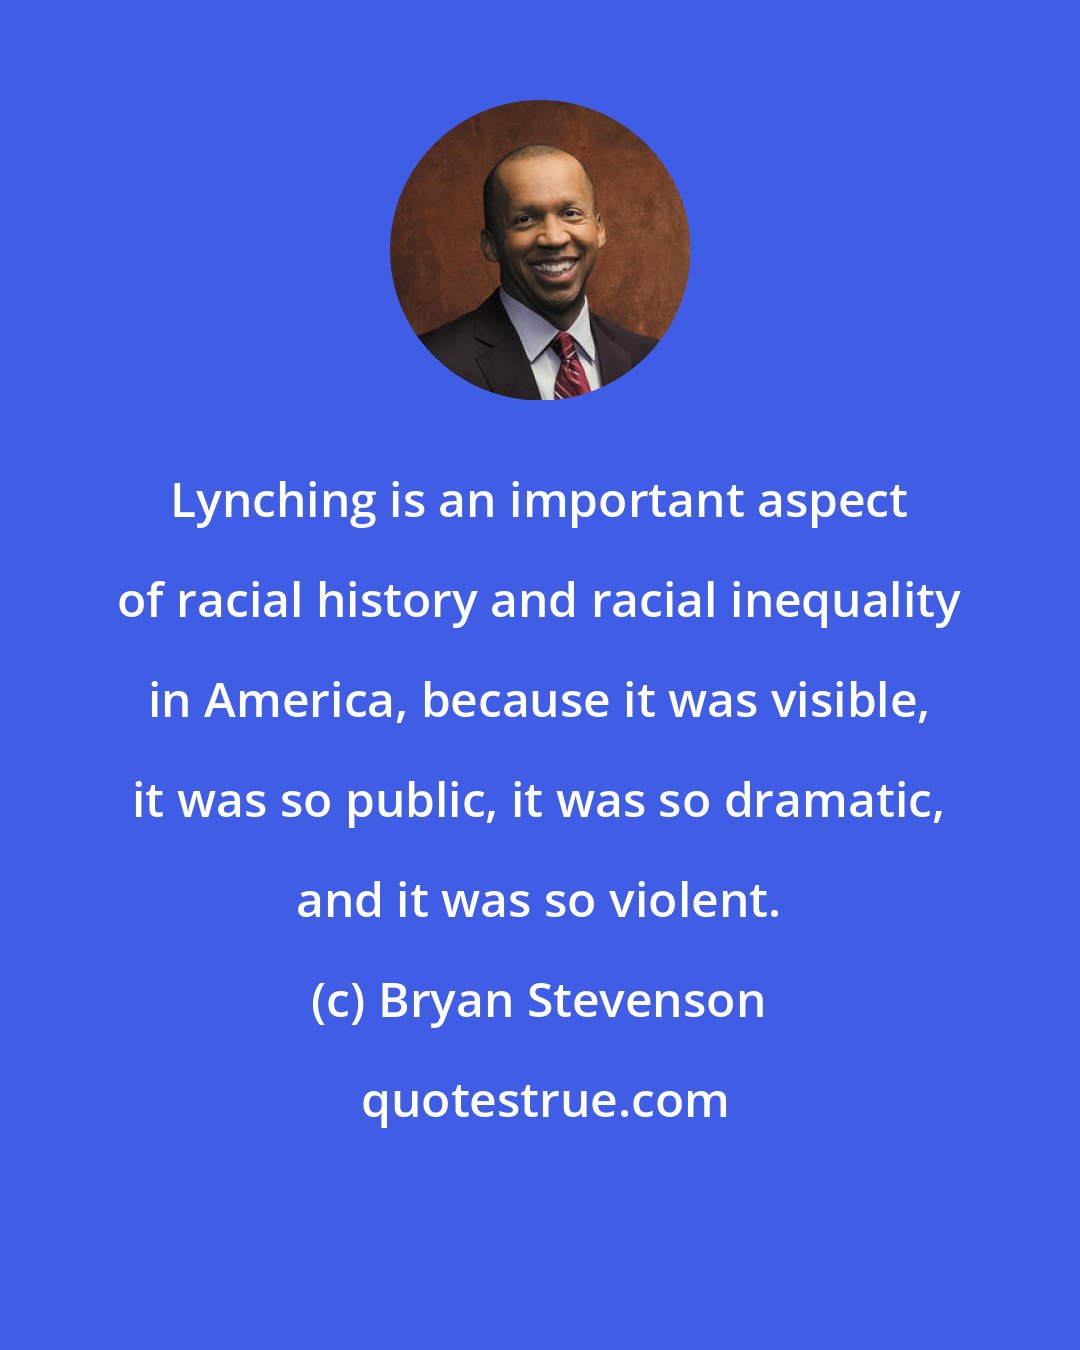 Bryan Stevenson: Lynching is an important aspect of racial history and racial inequality in America, because it was visible, it was so public, it was so dramatic, and it was so violent.